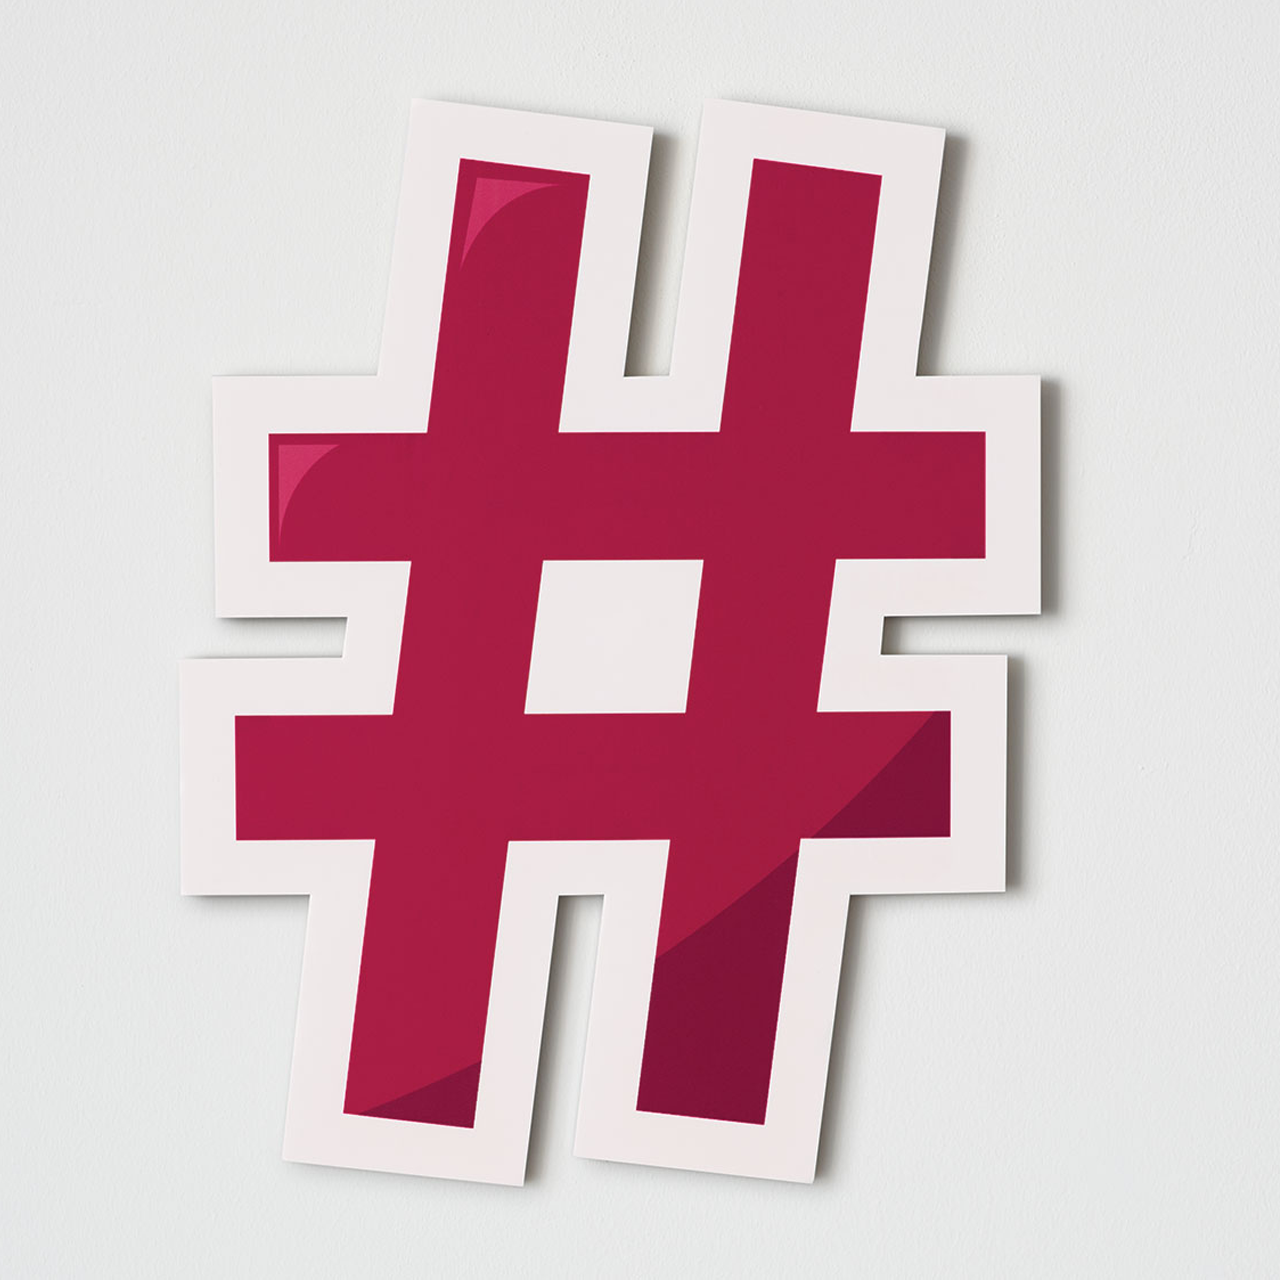 Using A Hashtag Strategy For Instagram